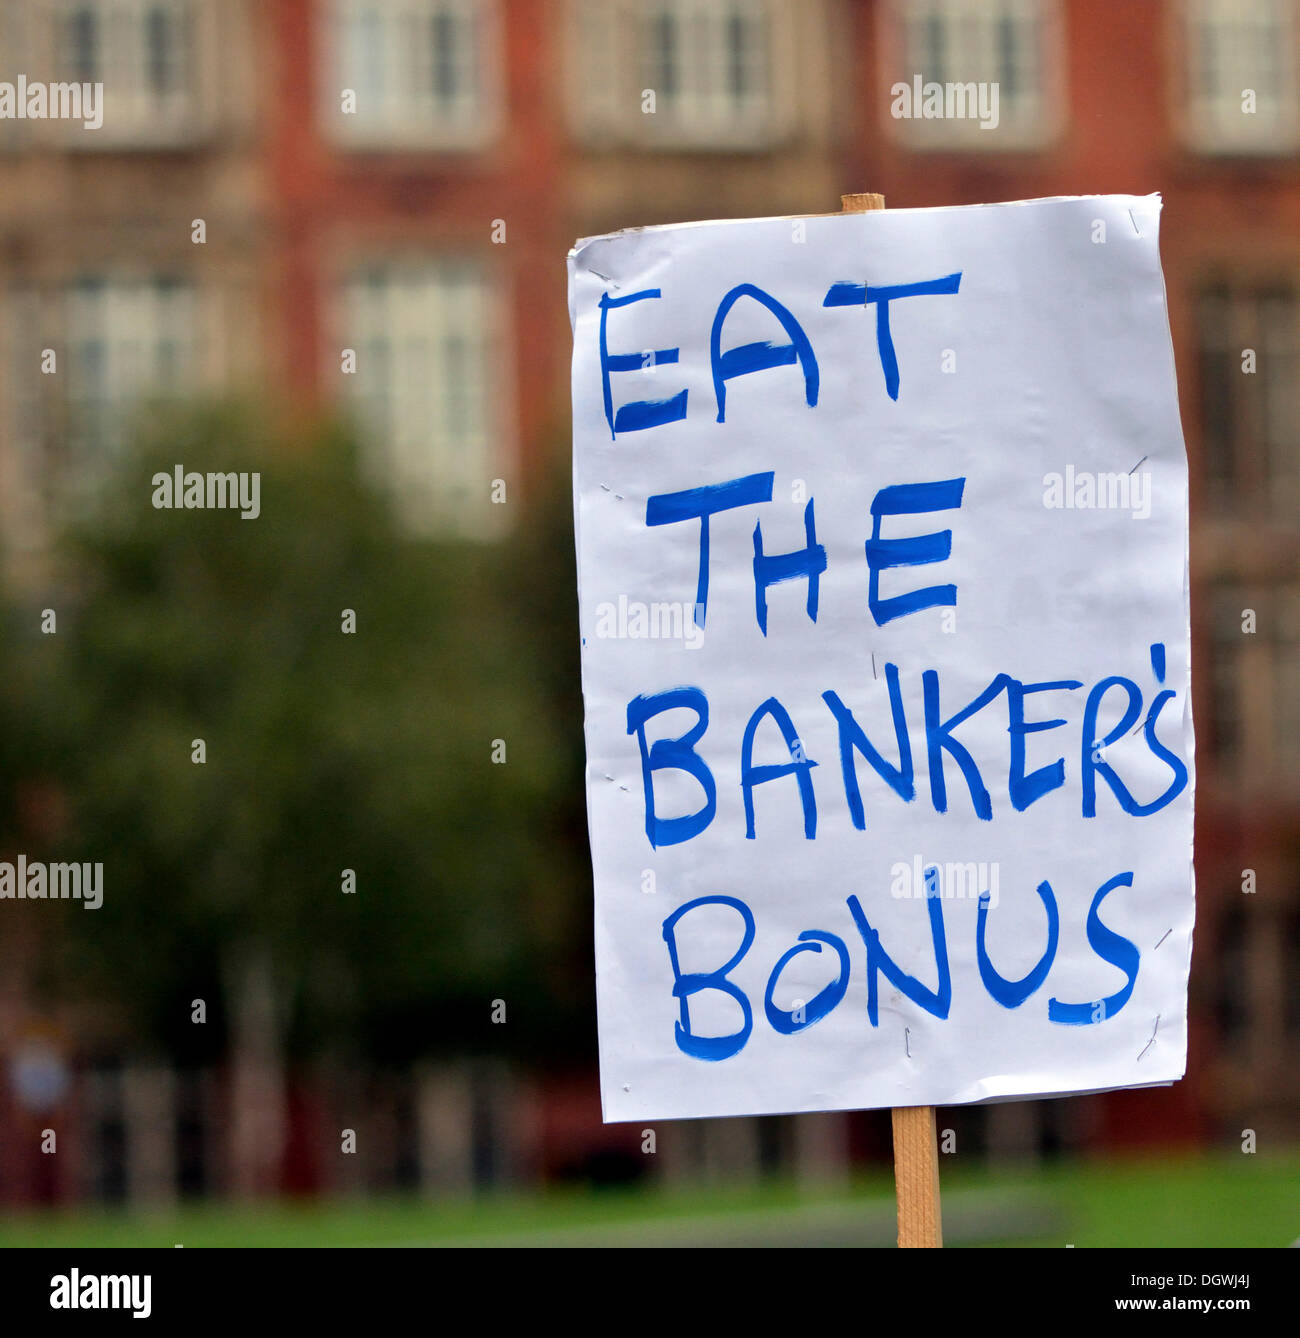 Manchester, UK. 26th Oct, 2013. A poster shows the displeasure of a small anti-Coalition Government group protesting against the bedroom tax and government measures, which are making the life of the ordinary citizen worse than before.  Credit:  John Fryer/Alamy Live News Stock Photo